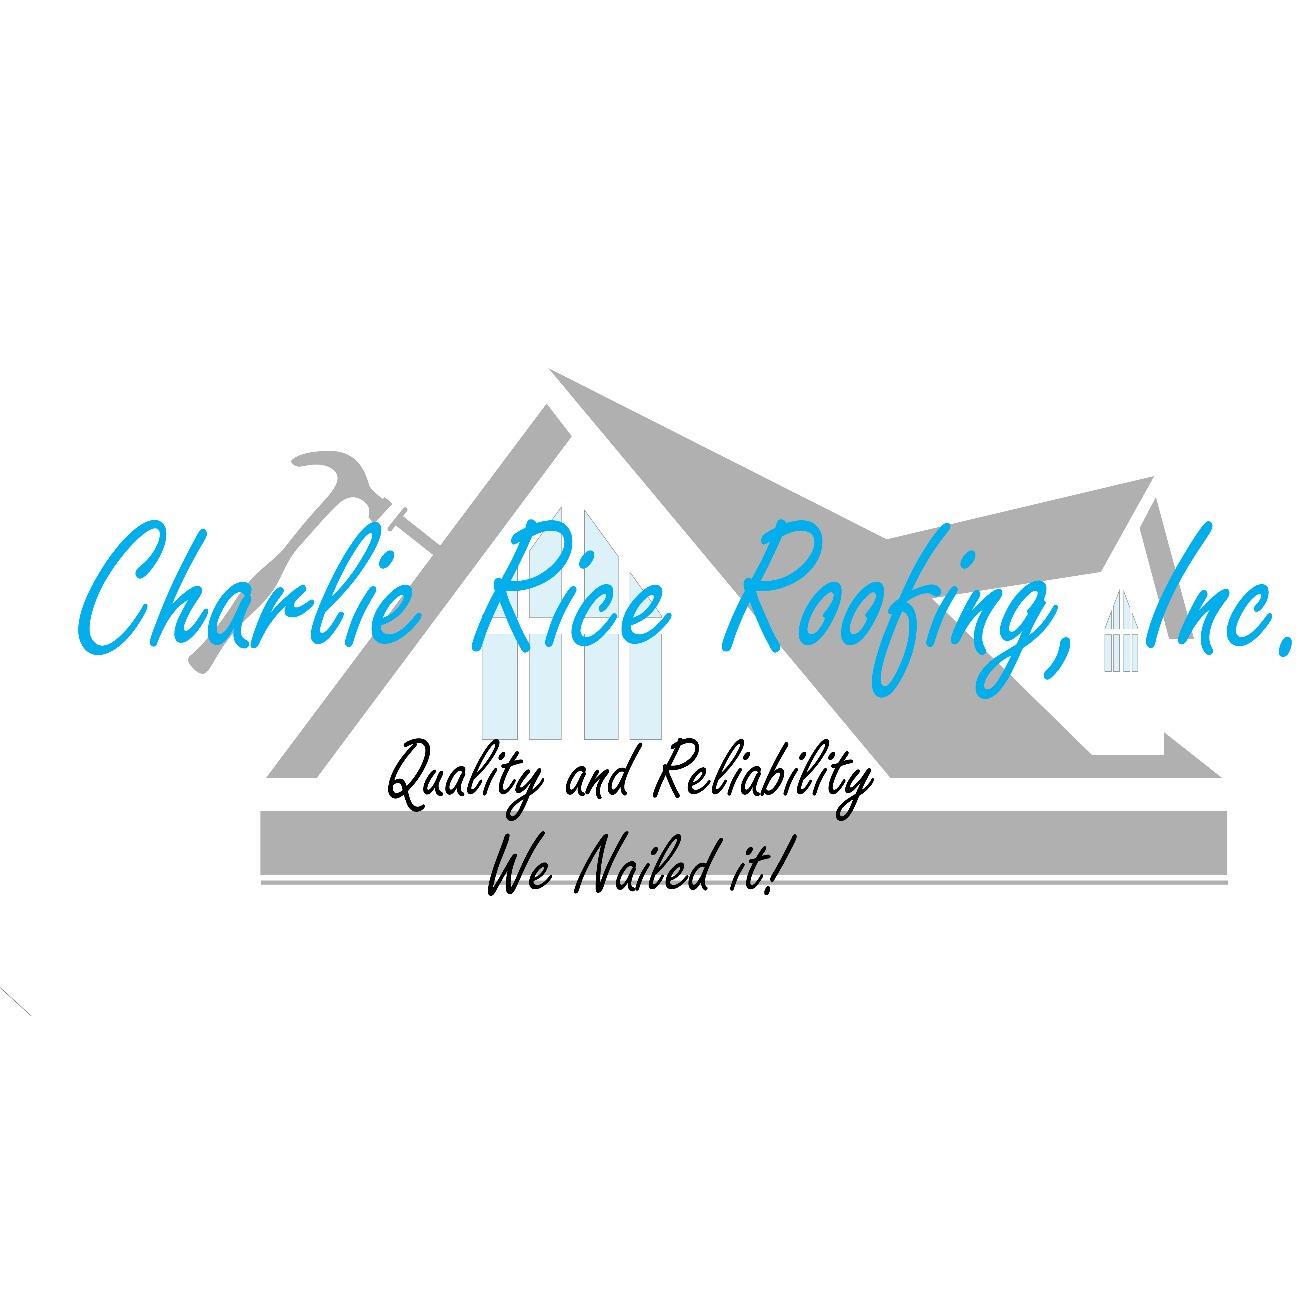 Charlie Rice Roofing, Inc. Logo